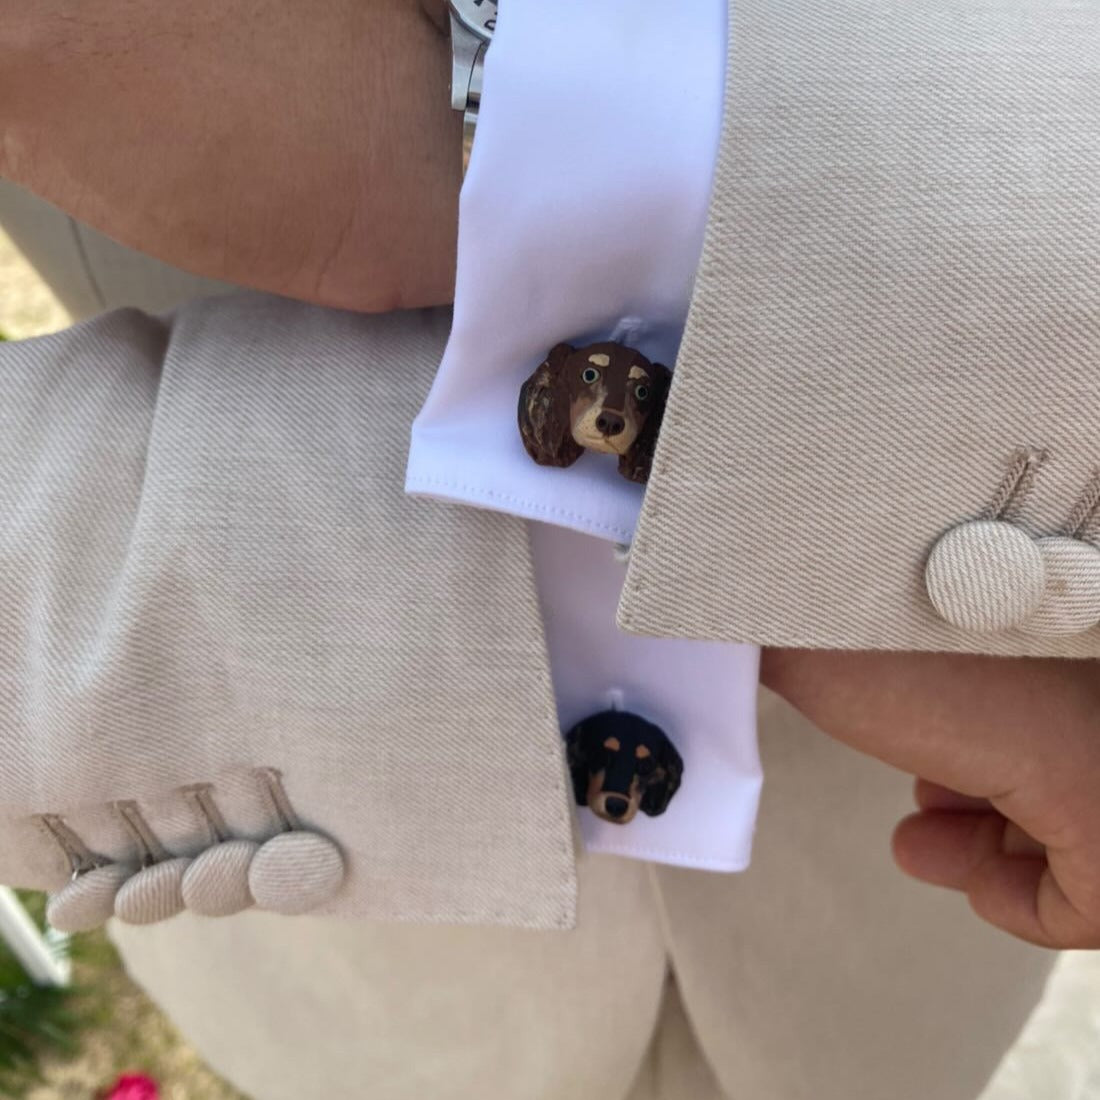 Mismatched dog cufflinks being worn by the groom at a wedding